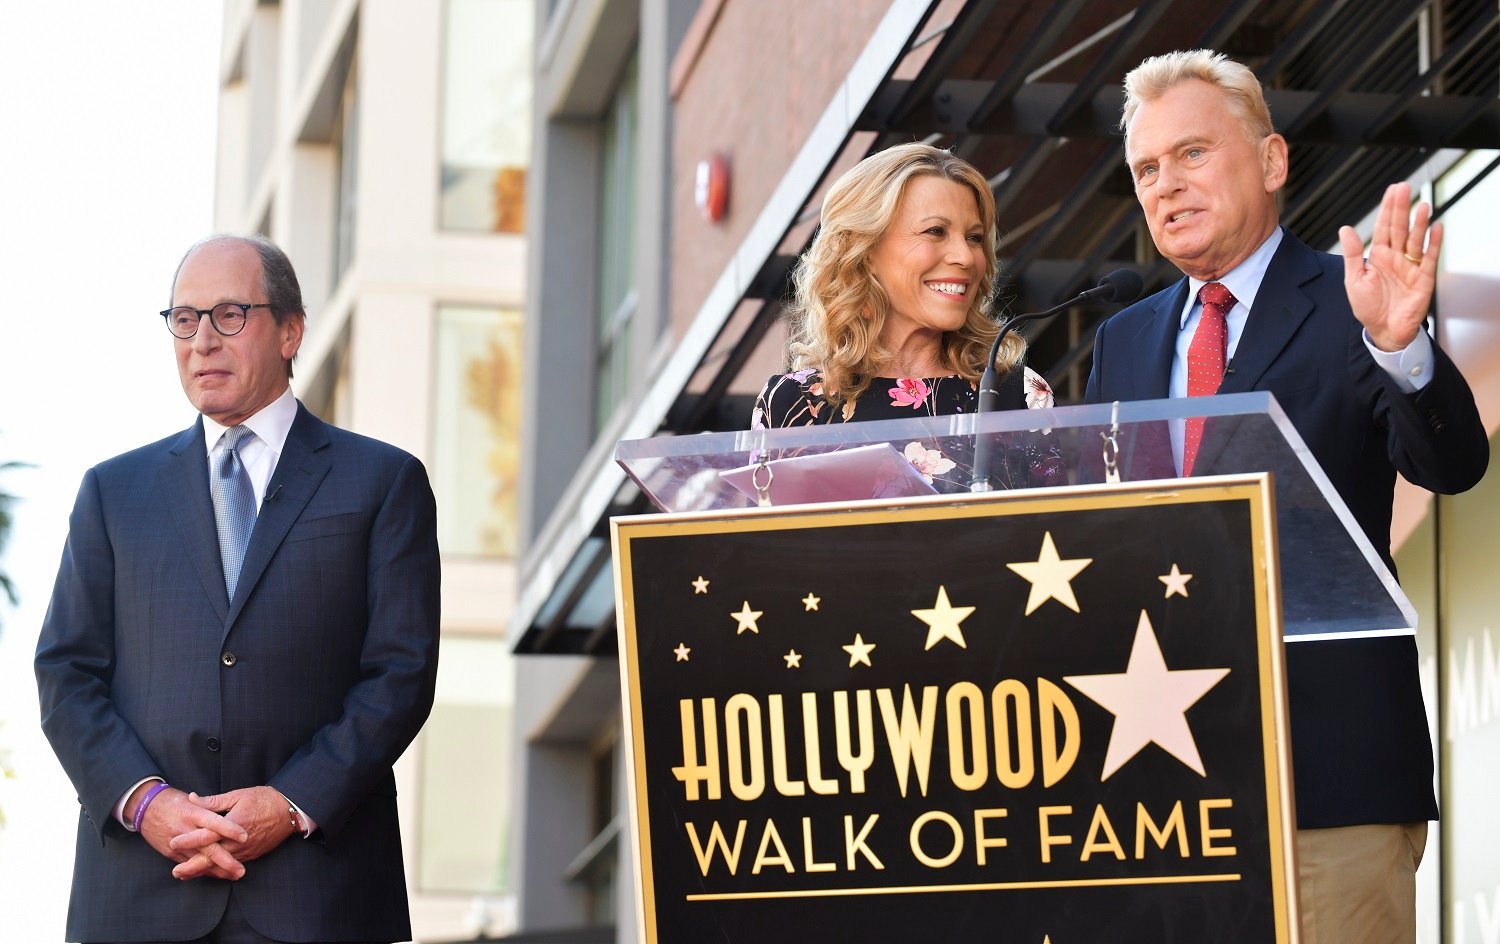 What is vanna white salary? Pictured here are Harry Friedman, Pat Sajak, and Vanna White.